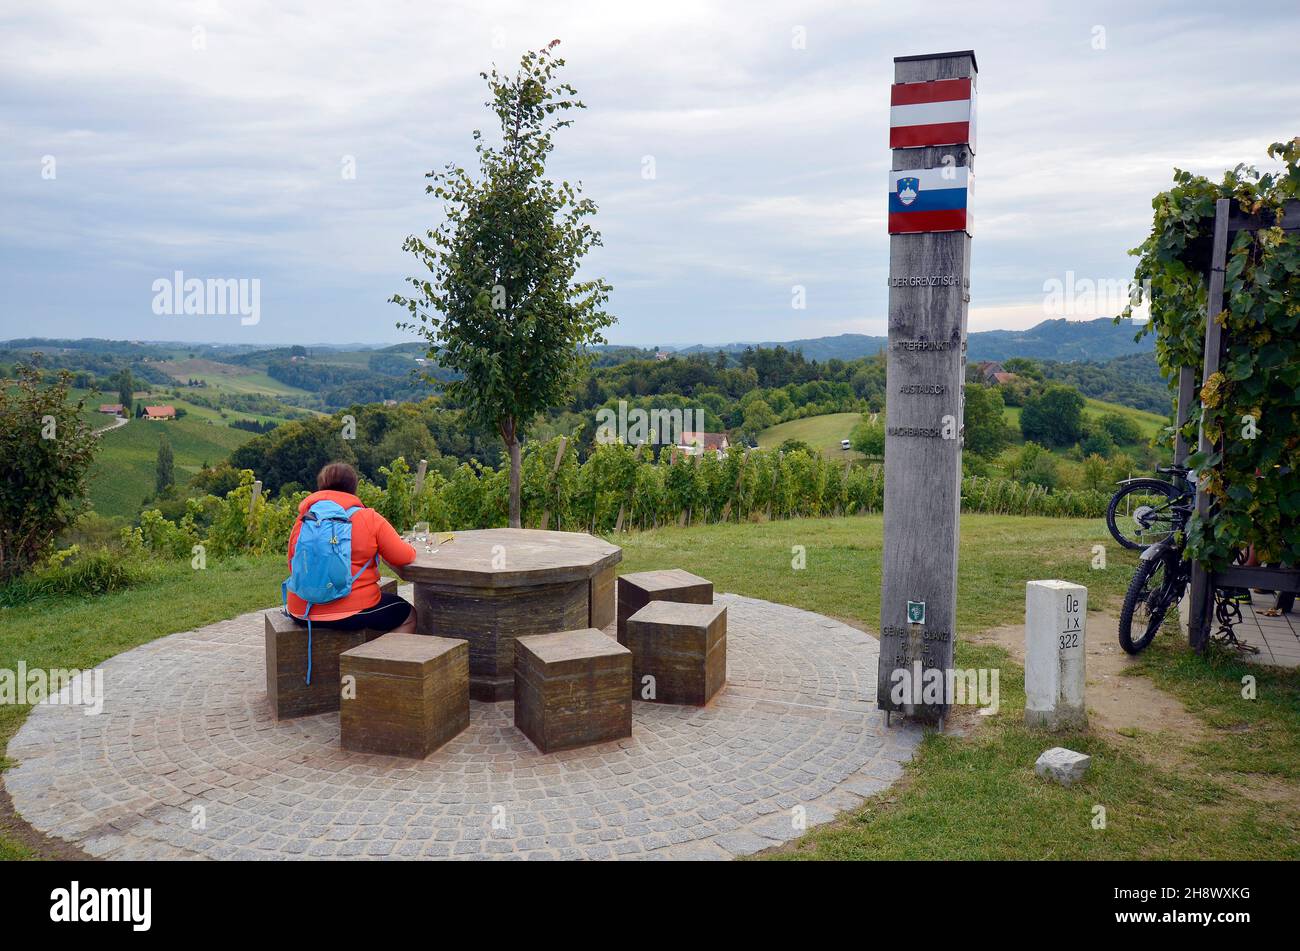 Glanz, Austria - September 22, 2021: Grenztisch - half of the so-called border table in southern Styria is in Austria and half of Slovenia, a symbol o Stock Photo